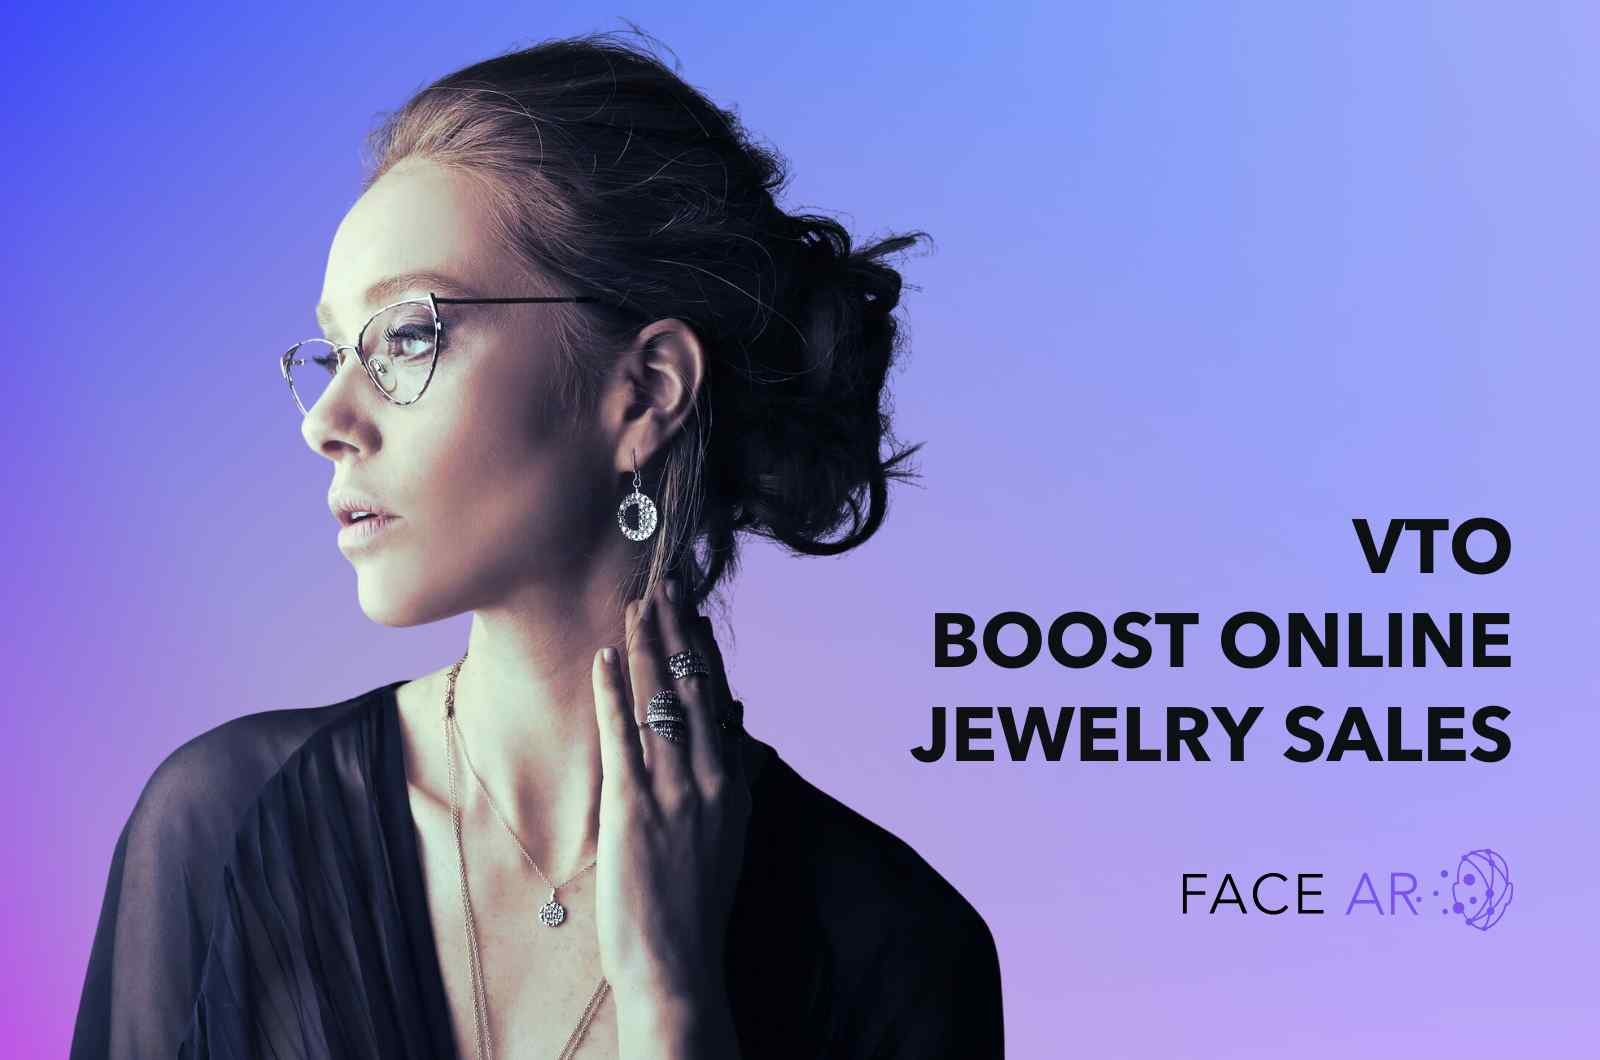 How Does Virtual Try-On (VTO) Technology Boost Online Jewelry Sales?